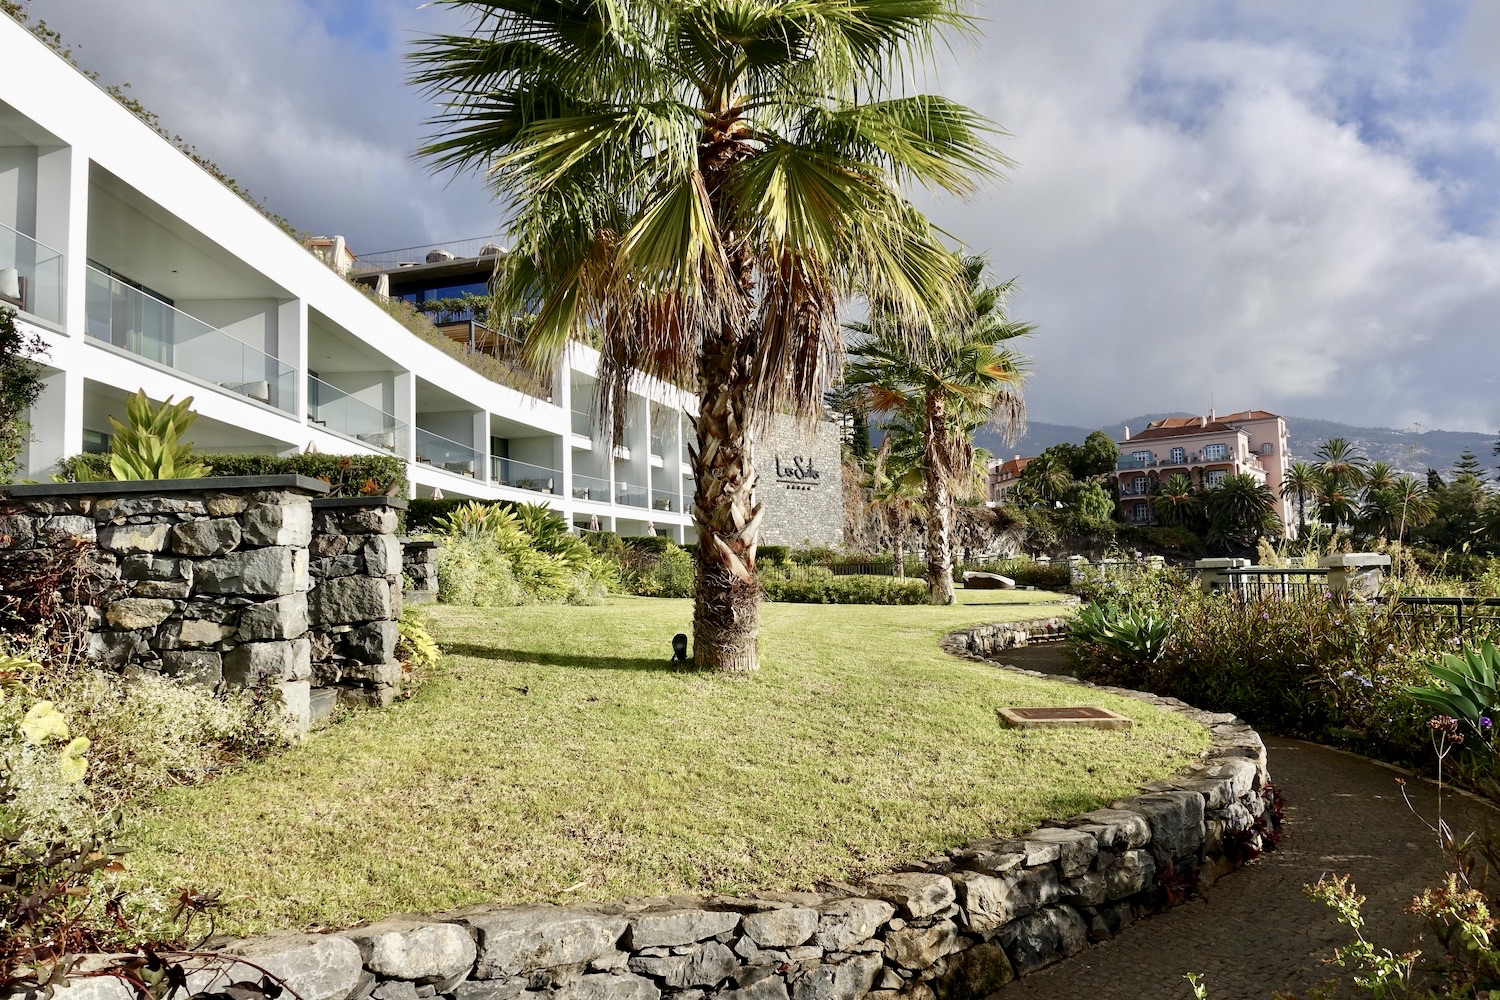 Les Suites at The Cliff Bay & Reid's Palace, 2 of the best luxury hotels in Madeira